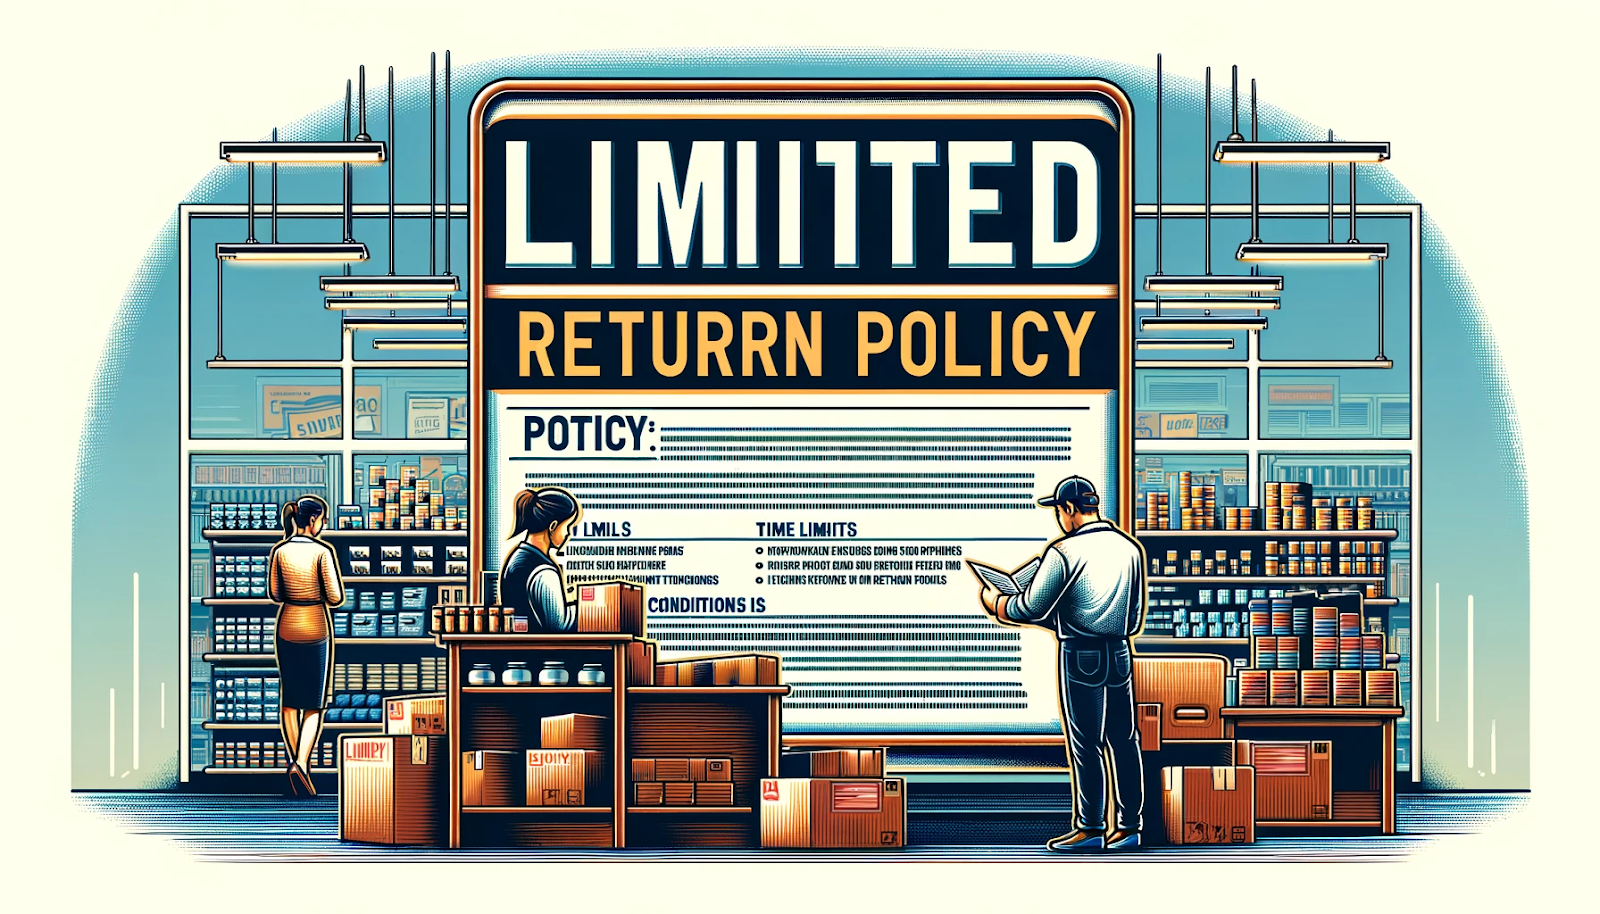 Limited Return Policy to reduce returns